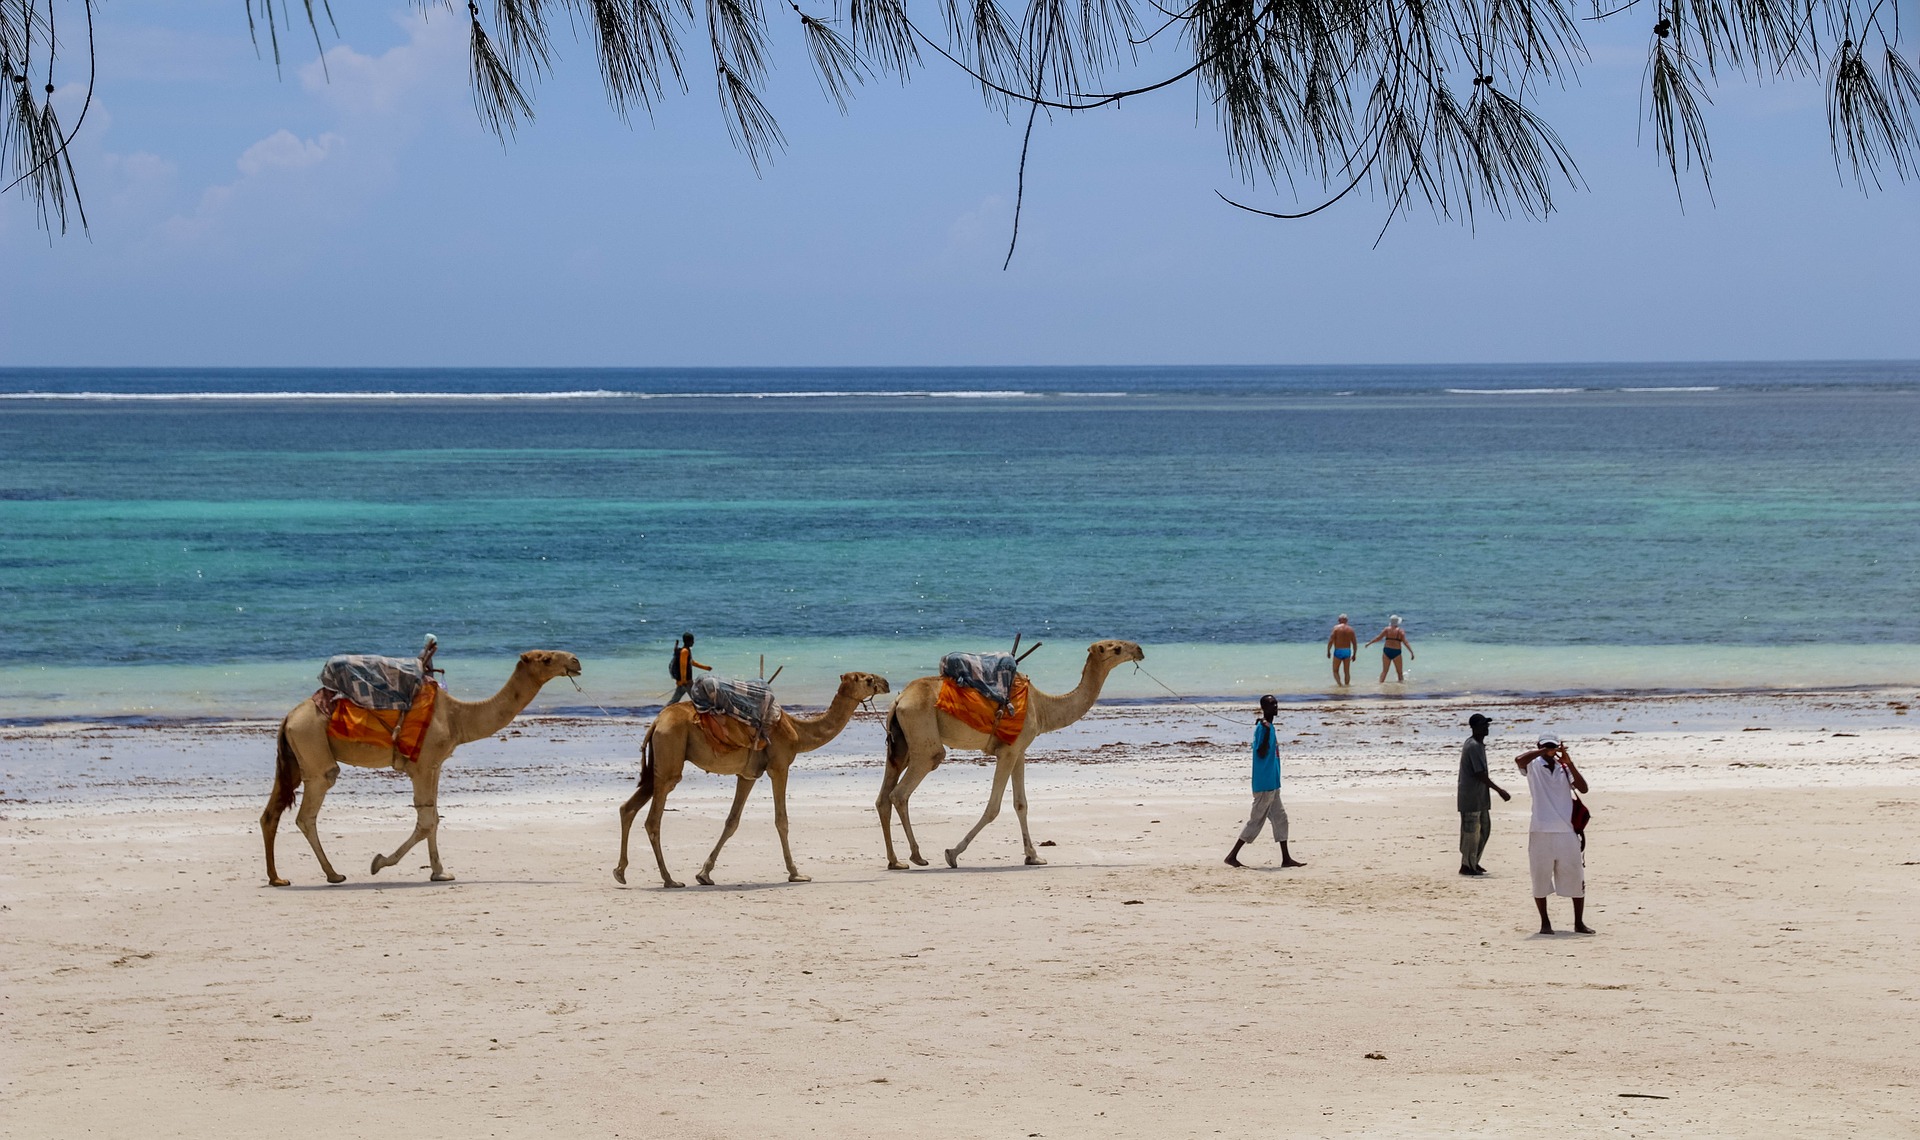 MOMBASA - KILIFI - DIANI. - 3 NIGHTS ON THE COAST. You’ll visit Fort Jesus to learn about the history of colonization along Kenya’s coast and the role it played in the slave trade. You’ll also explore Mombasa’s charming Old Town, with its spice markets, tuk-tuks, and narrow streets. A day trip to Diani will give you a chance to relax and reflect on a beach with crystal clear waters. During this portion of the trip, we’ll be joined by the writers and photographers who are putting Kenya’s coast on the map.